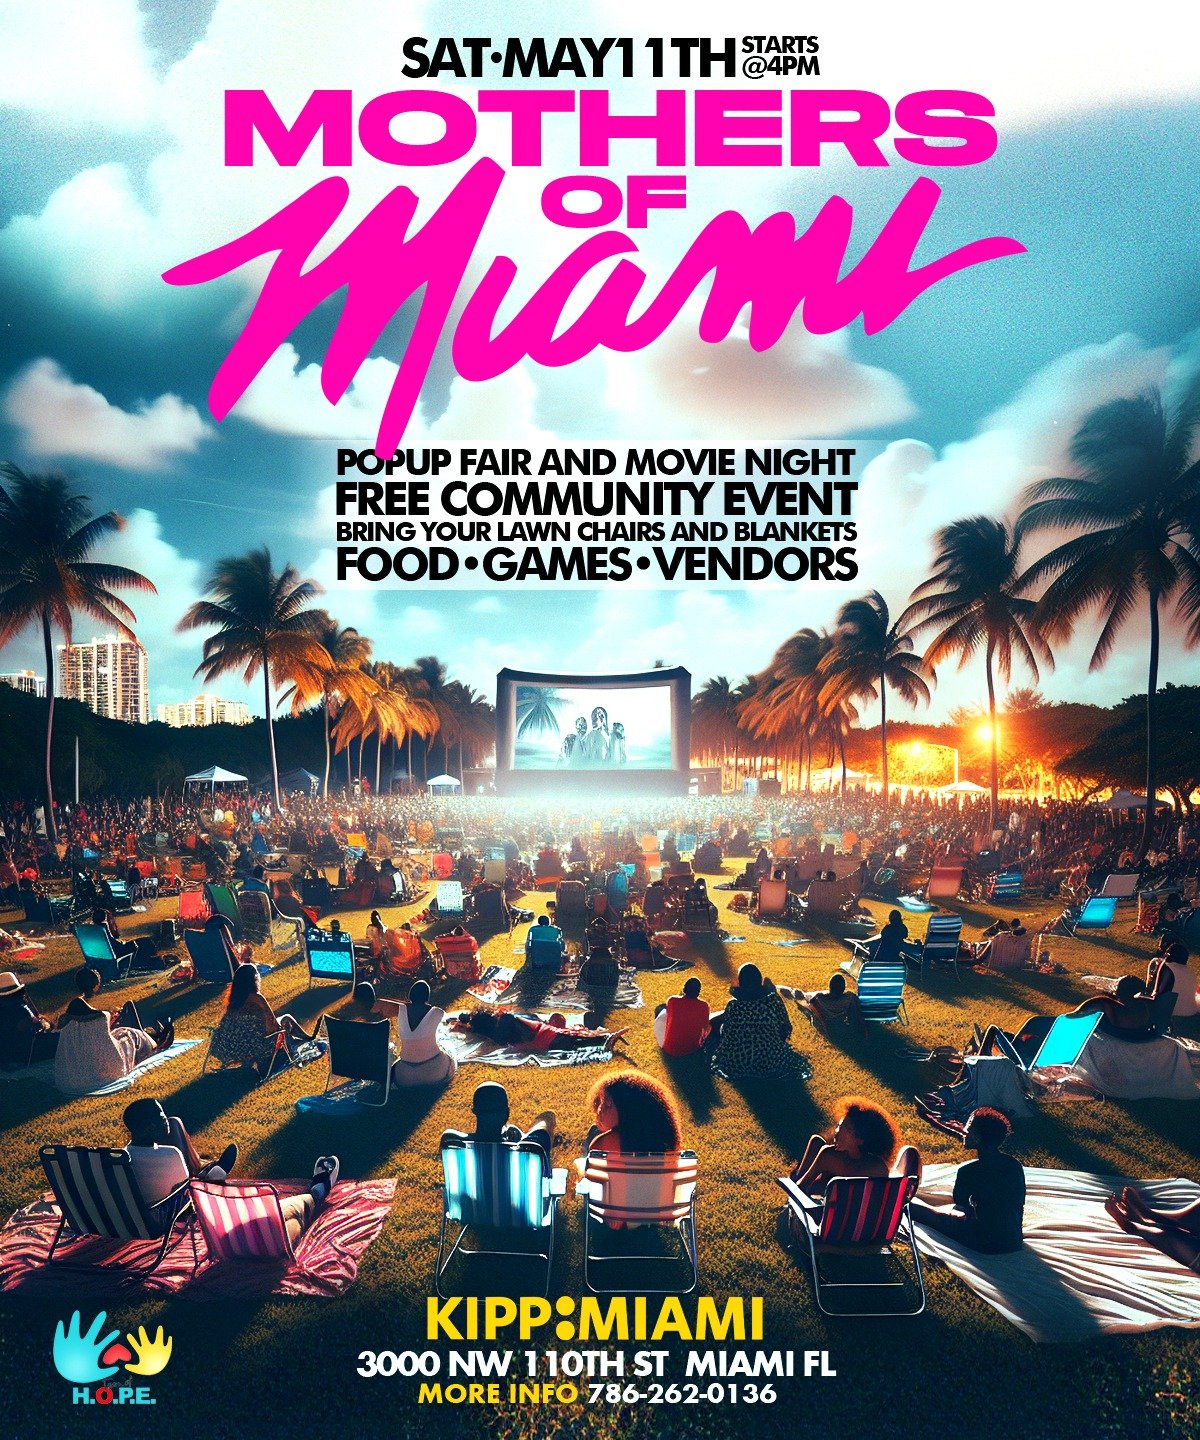 MOM - MOTHERS OF MIAMI POPUP EVENT AND MOVIE NIGHT
Celebrating all the amazing moms in Miami!
Please pre-register for FREE MOM gift bags and to qualify for the cash raffle prize.
PLEASE REMEMBER TO BRING YOUR BLANKETS AND LAWN CHAIRS FOR THE MOVIE.